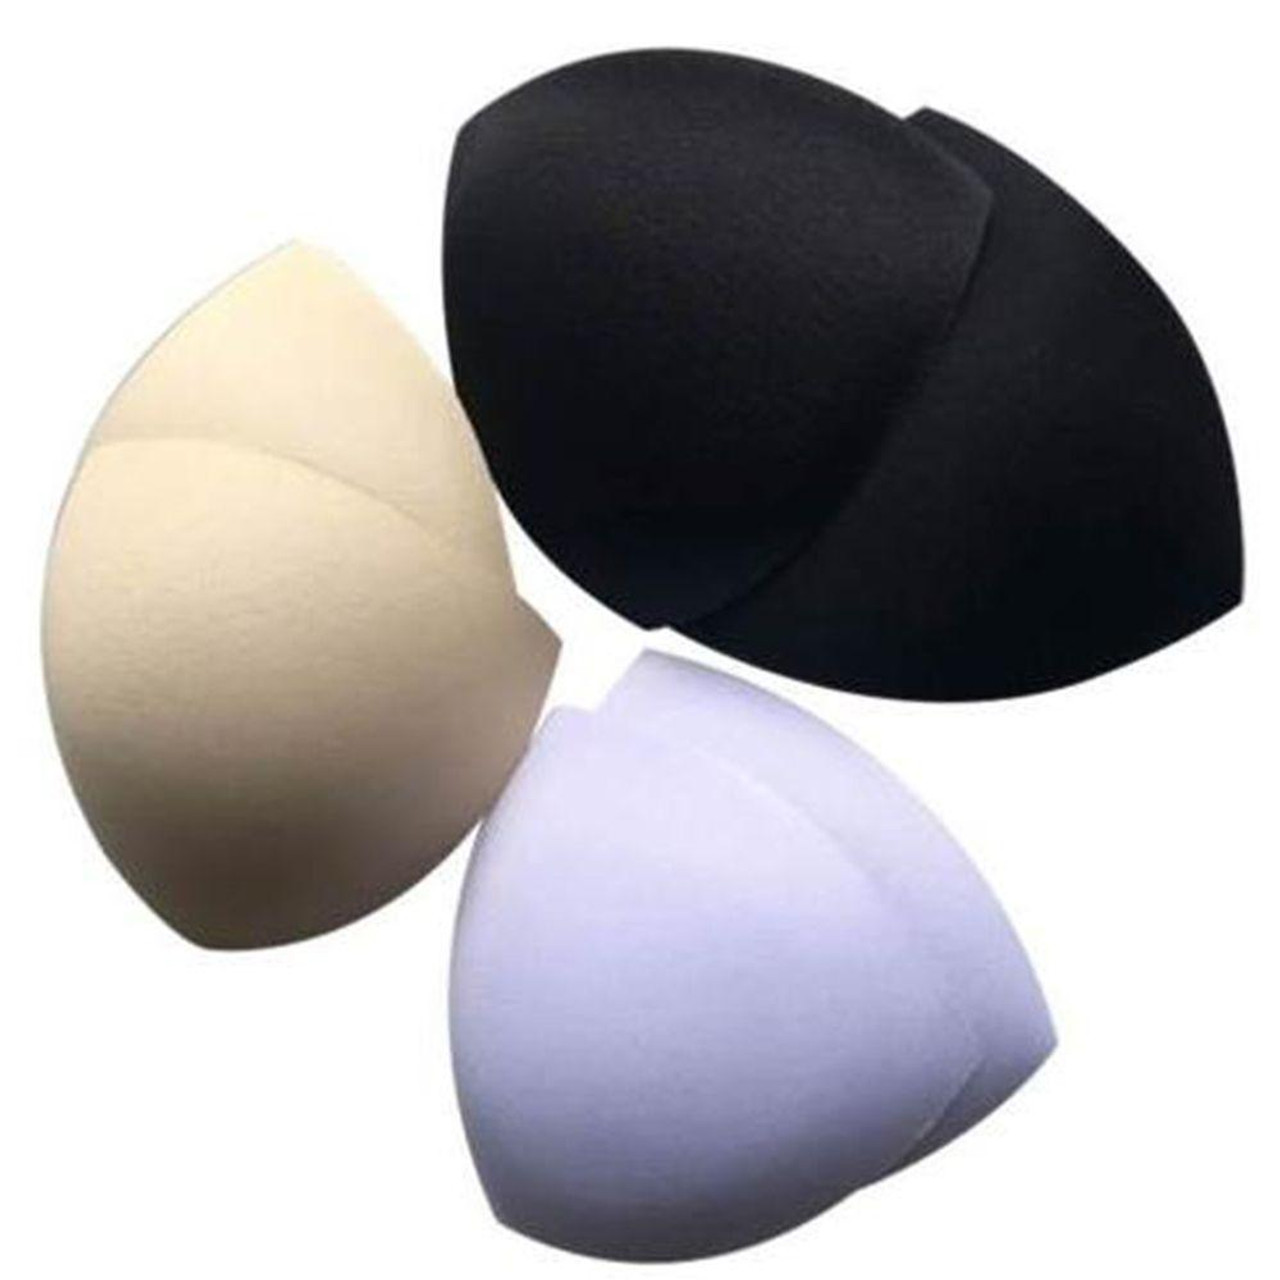 3 Pairs Bra Pads Inserts Soft Comfy Push up Sew Cups for Sports Bra